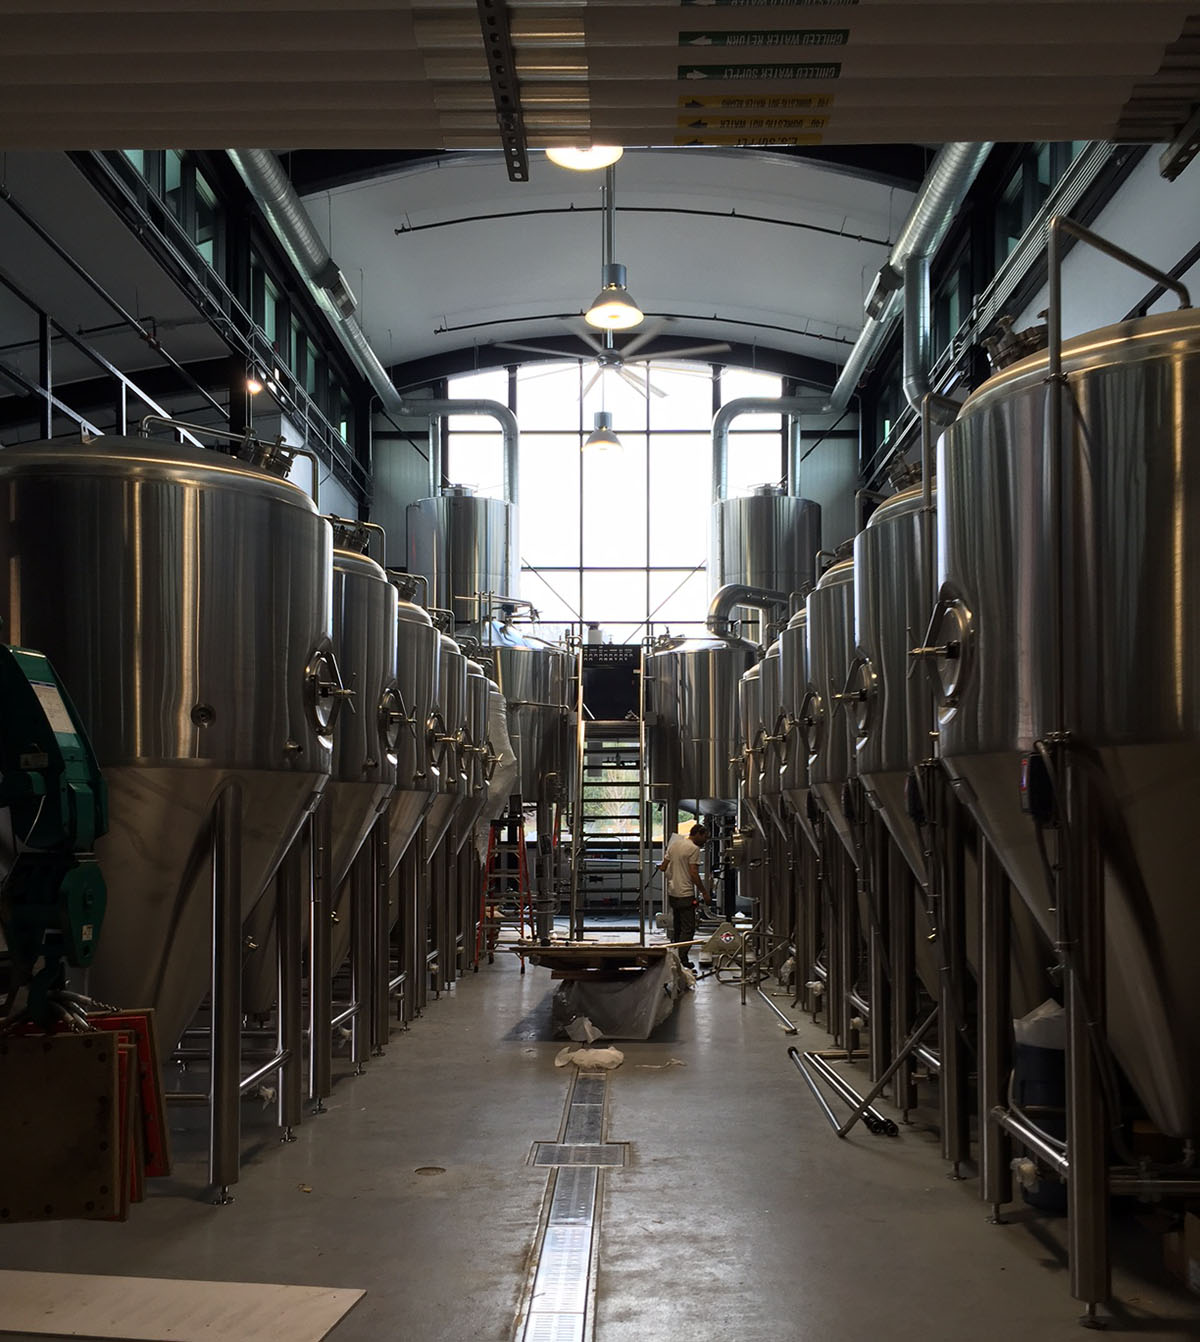 The Alchemist's new brewhouse in Stowe, Vt.